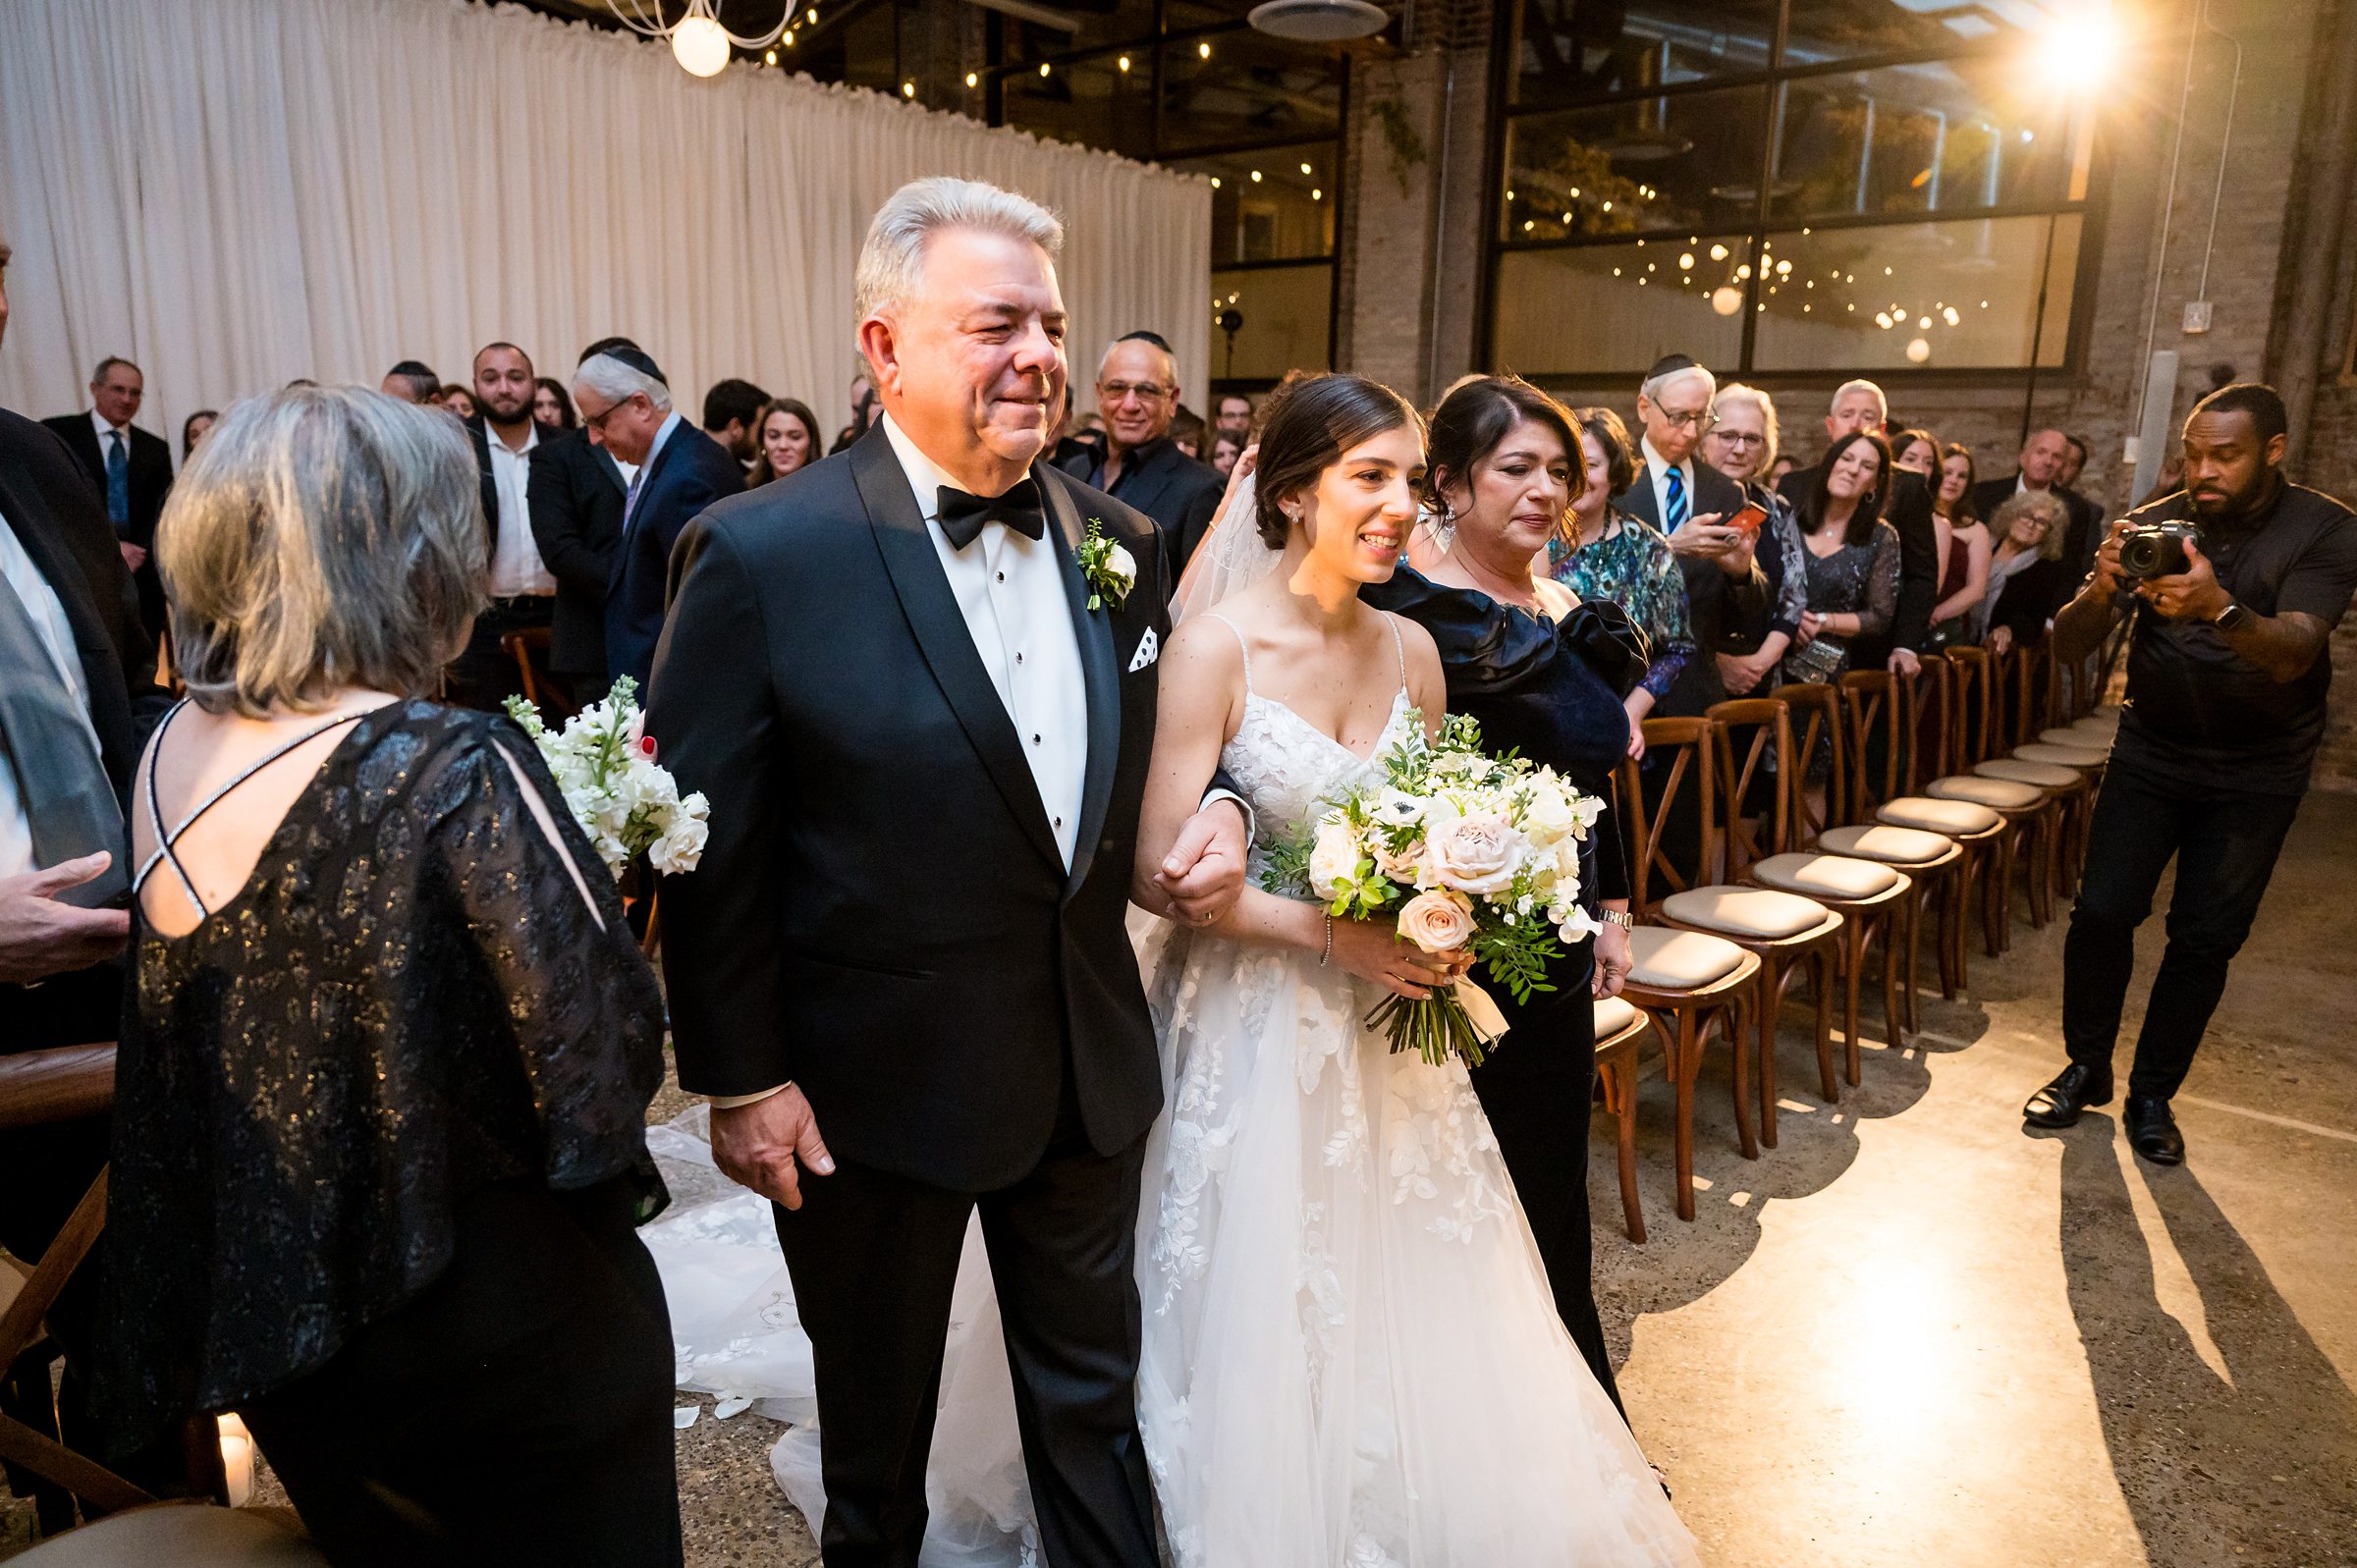 At a Lilah Events wedding, a bride gracefully walks down the aisle with her father.